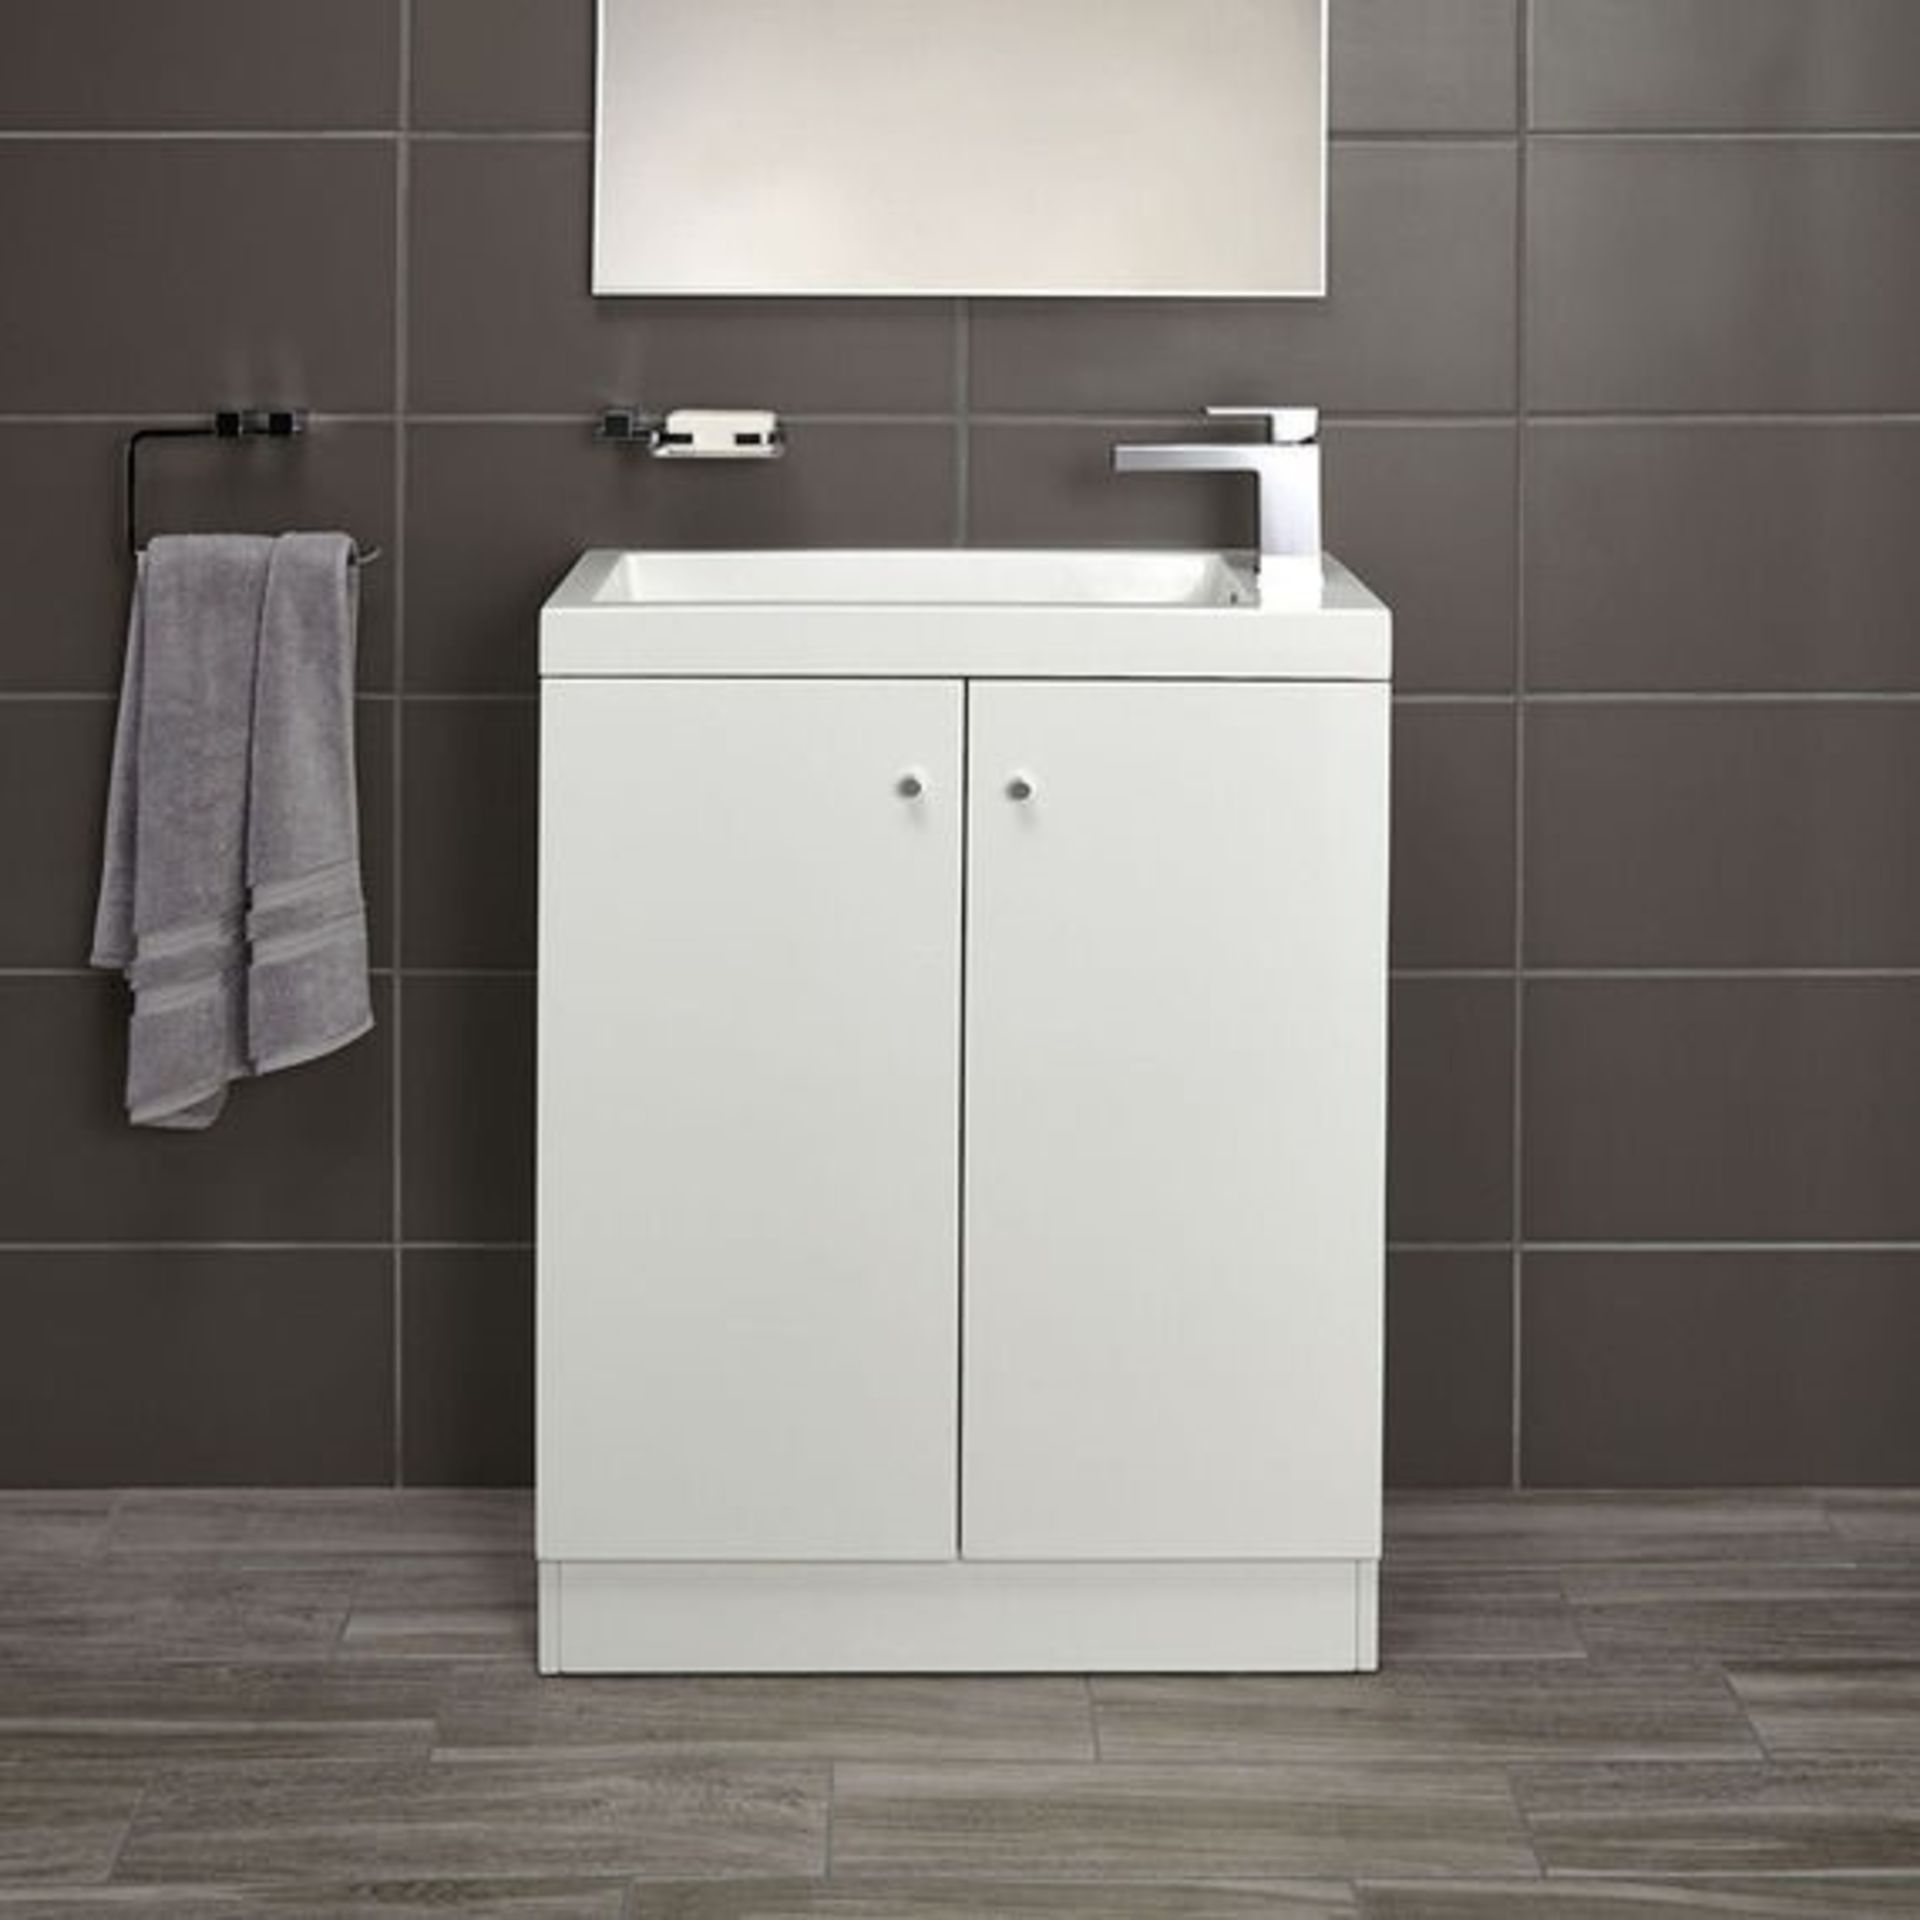 10 x Alpine Duo 660 Floorstanding Vanity Units In Gloss White - Dimensions: H80 x W66 x D35cm - - Image 4 of 4